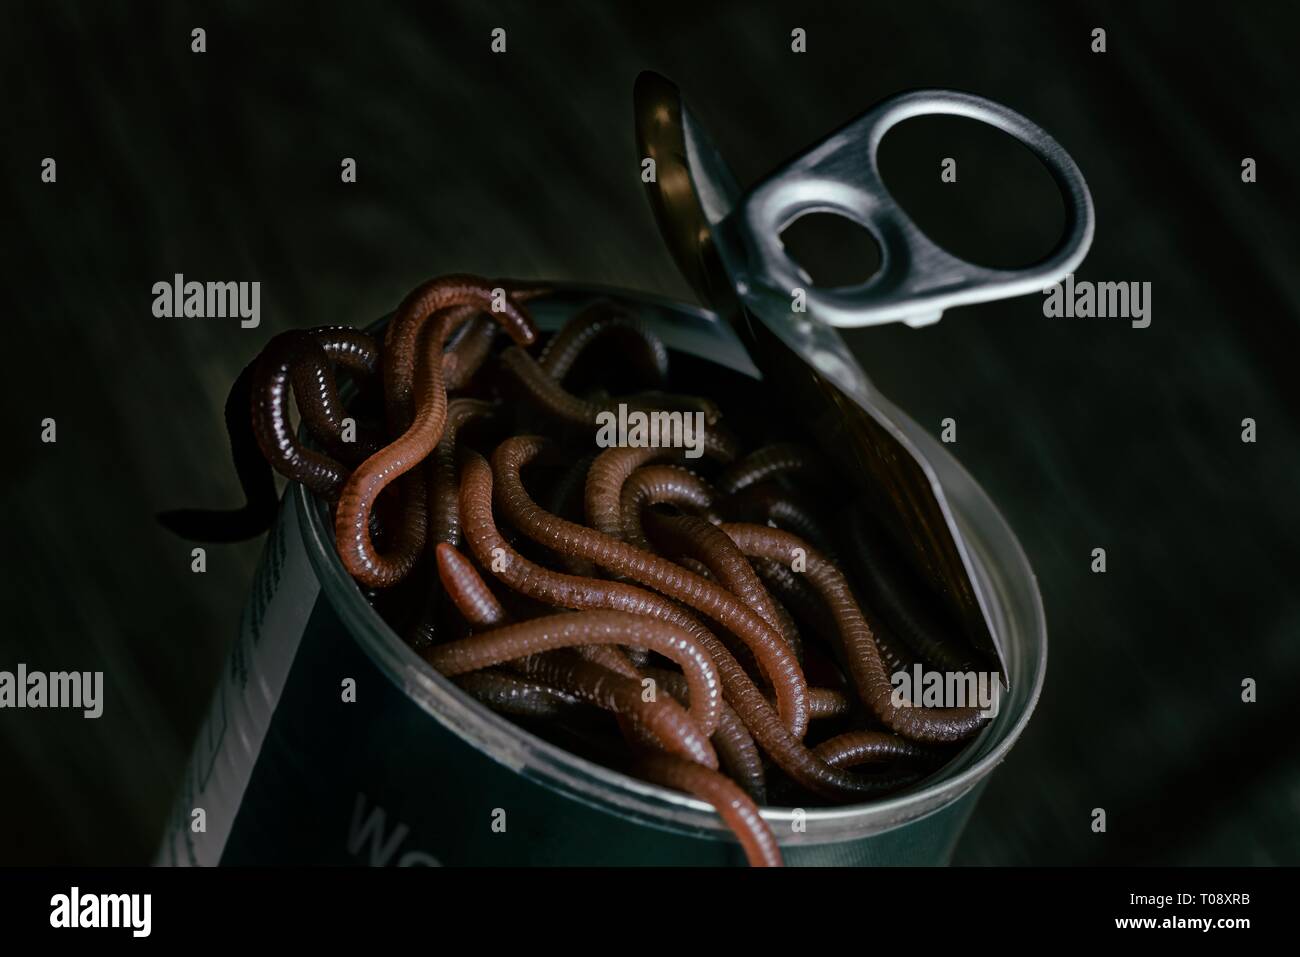 Dark, moody studio shot depicting a freshly opened can of worms. One dark worm is already leaving the can. Stock Photo